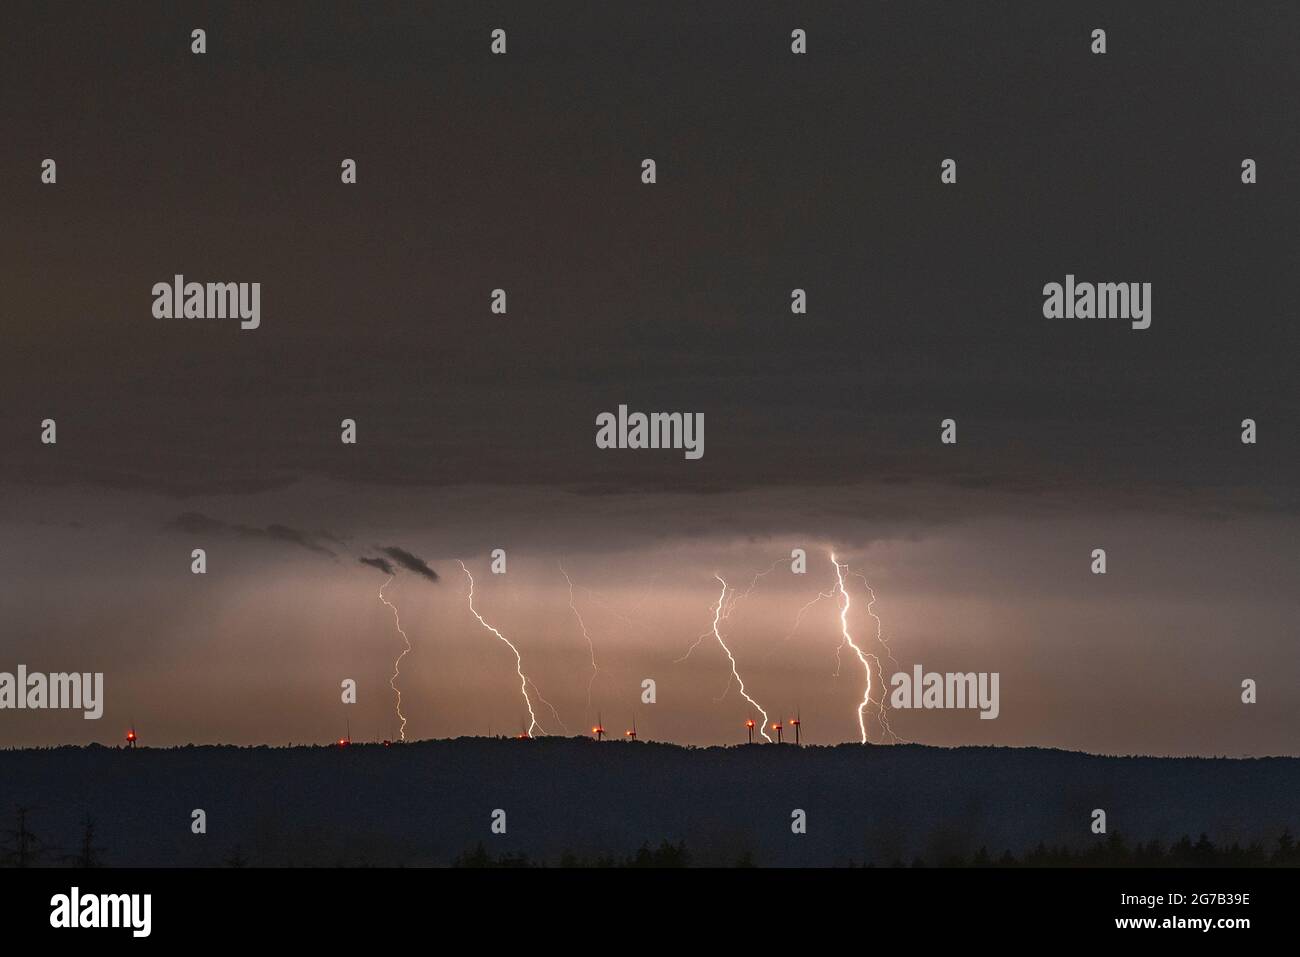 Thunderstorm with lightning strikes in Thuringia. Stock Photo